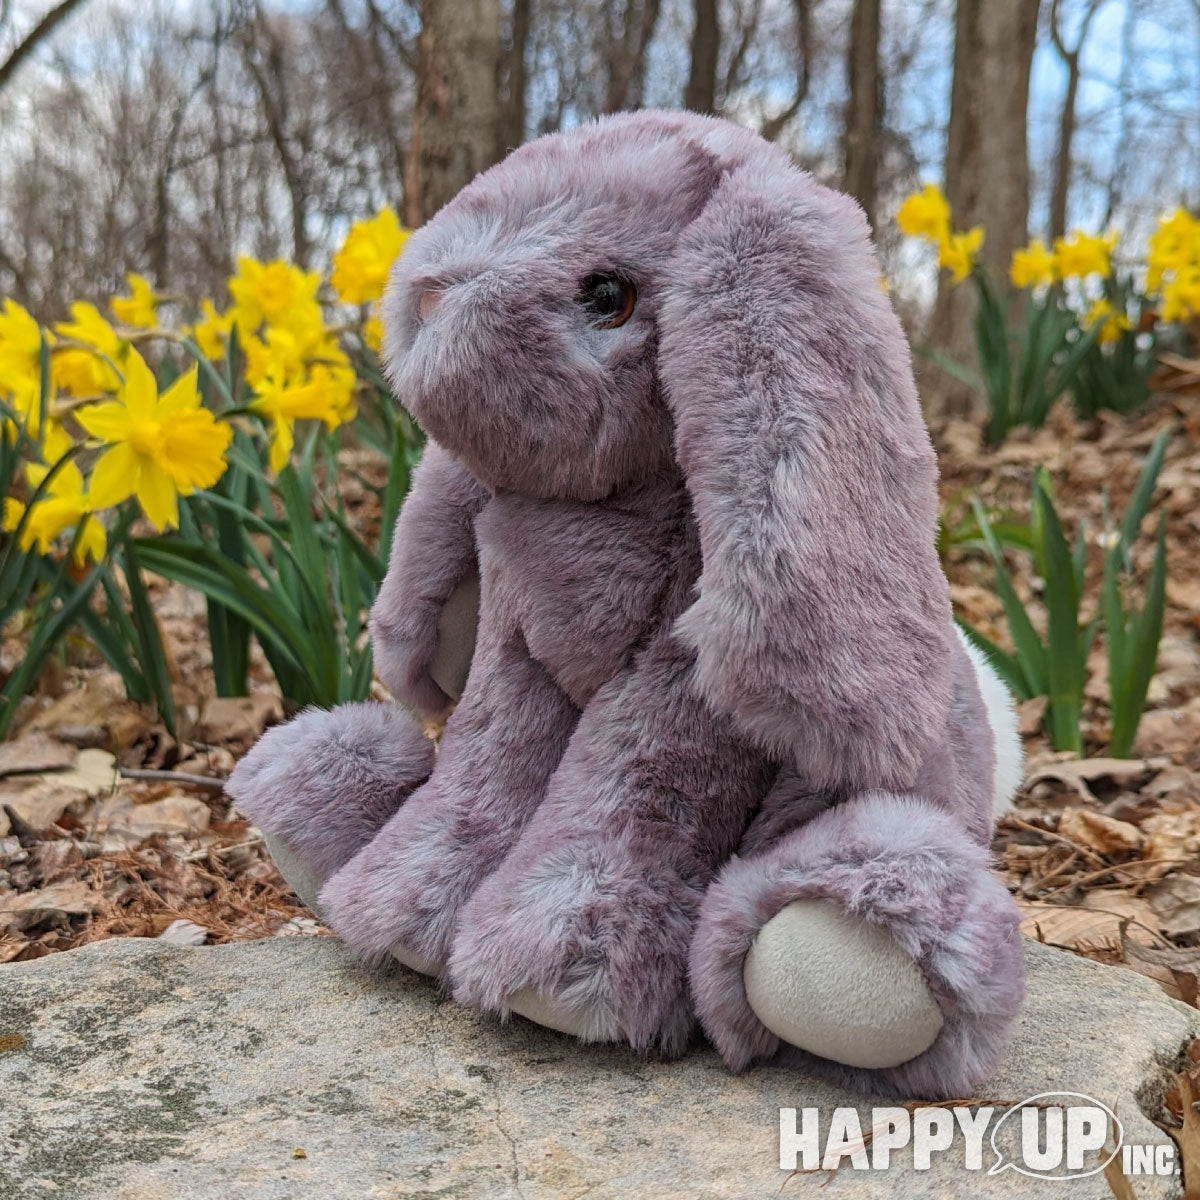 Douglas Softs Vickie the Purple Bunny loves daffodils